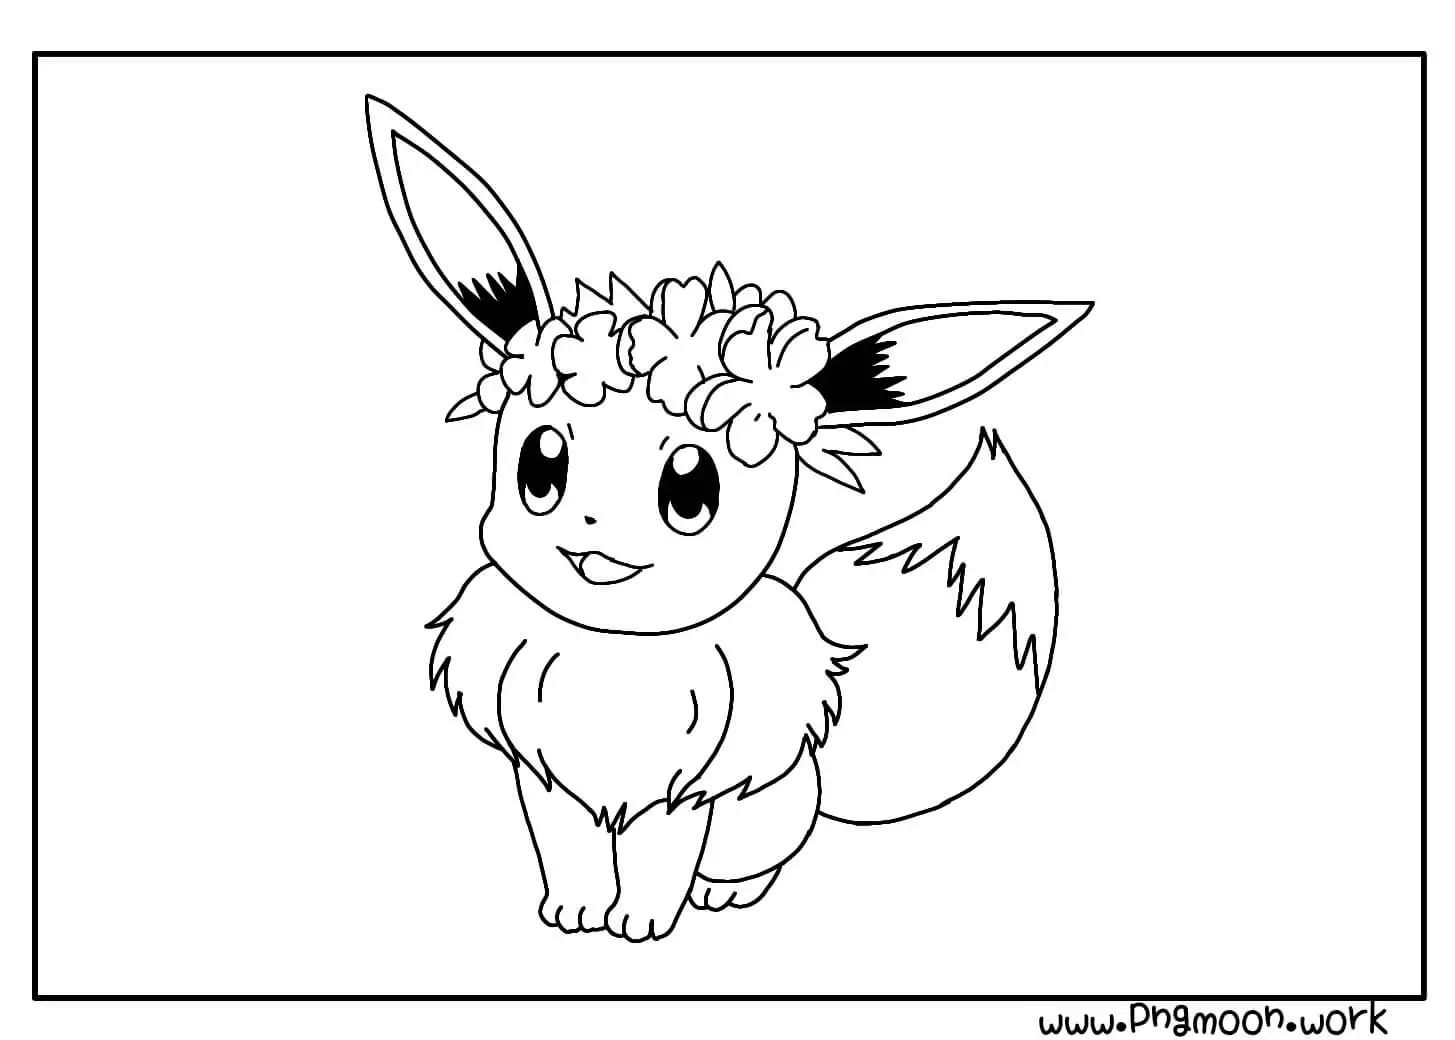 Eevee pokemon coloring pages pokemon coloring pages pokemon coloring pokemon letters